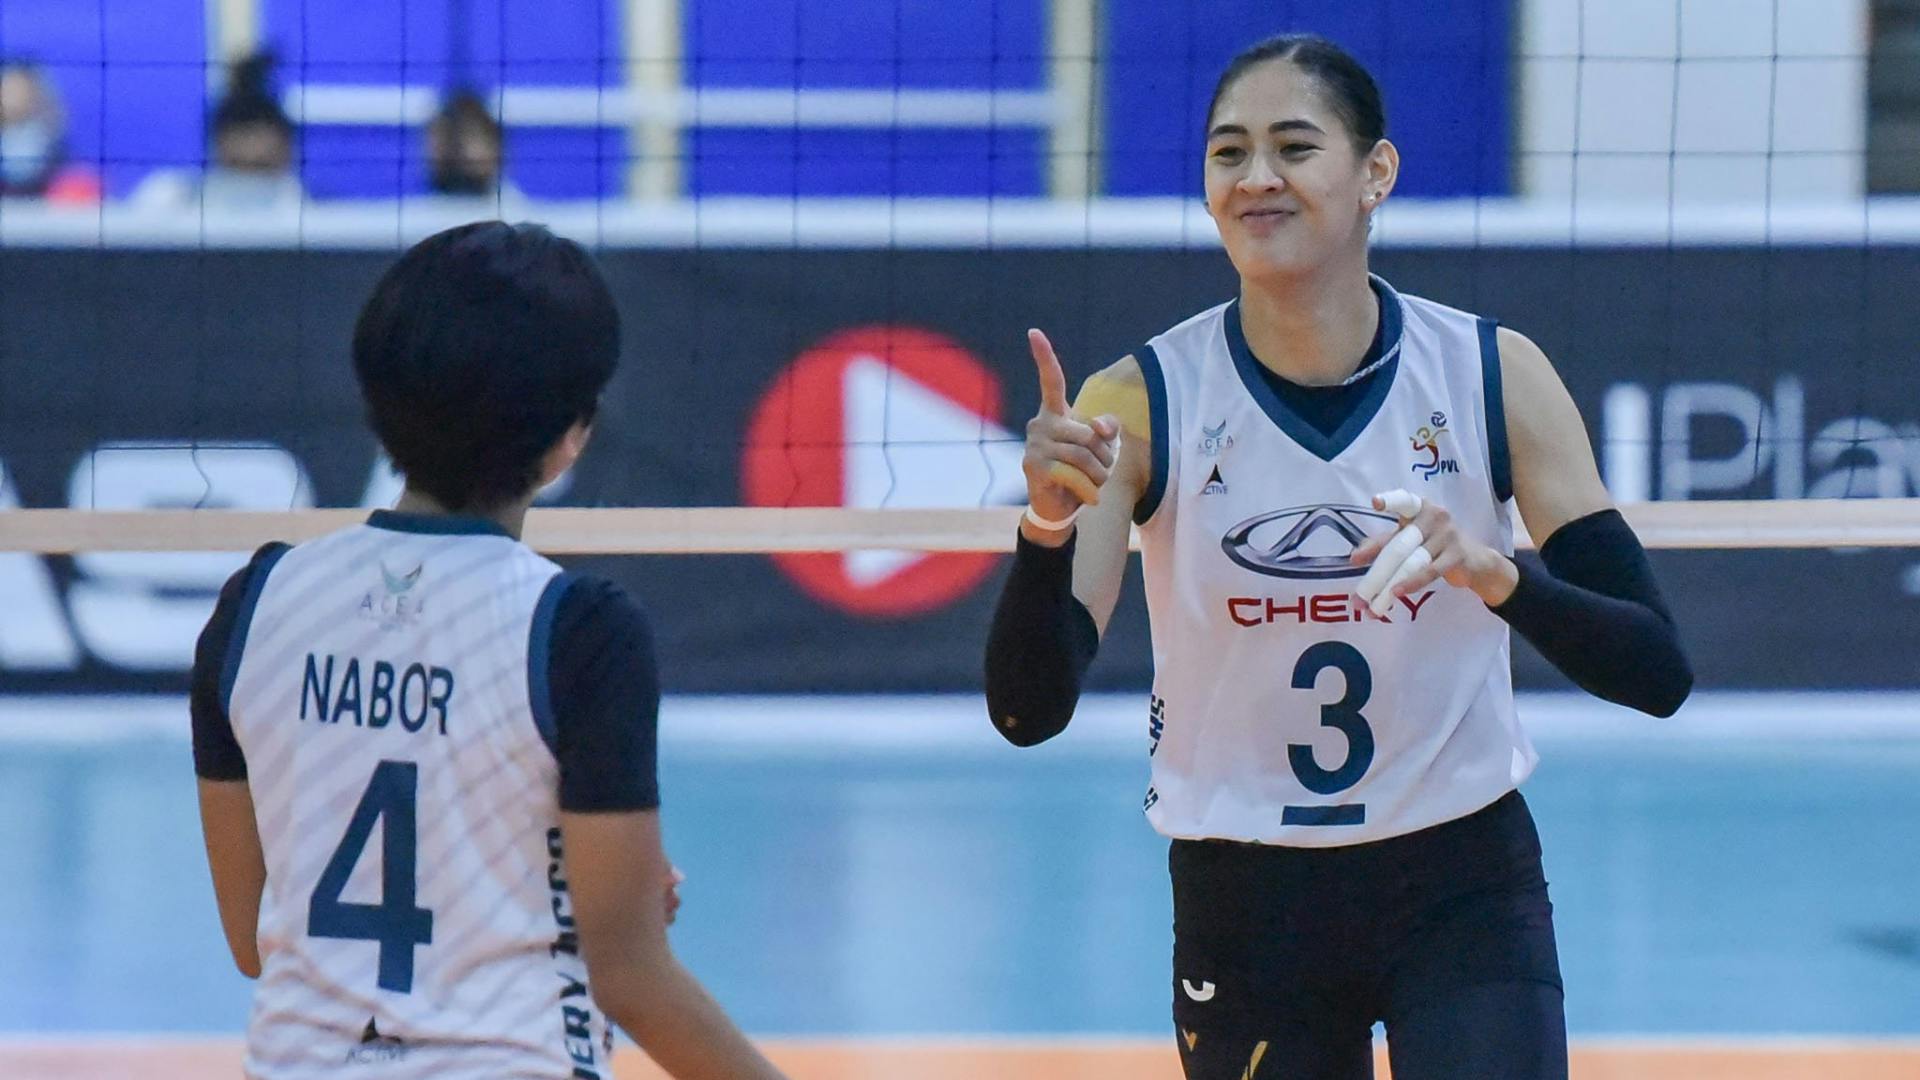 PVL: No Jaja Santiago for Chery Tiggo as V1 star plays it safe with ongoing Japan naturalization